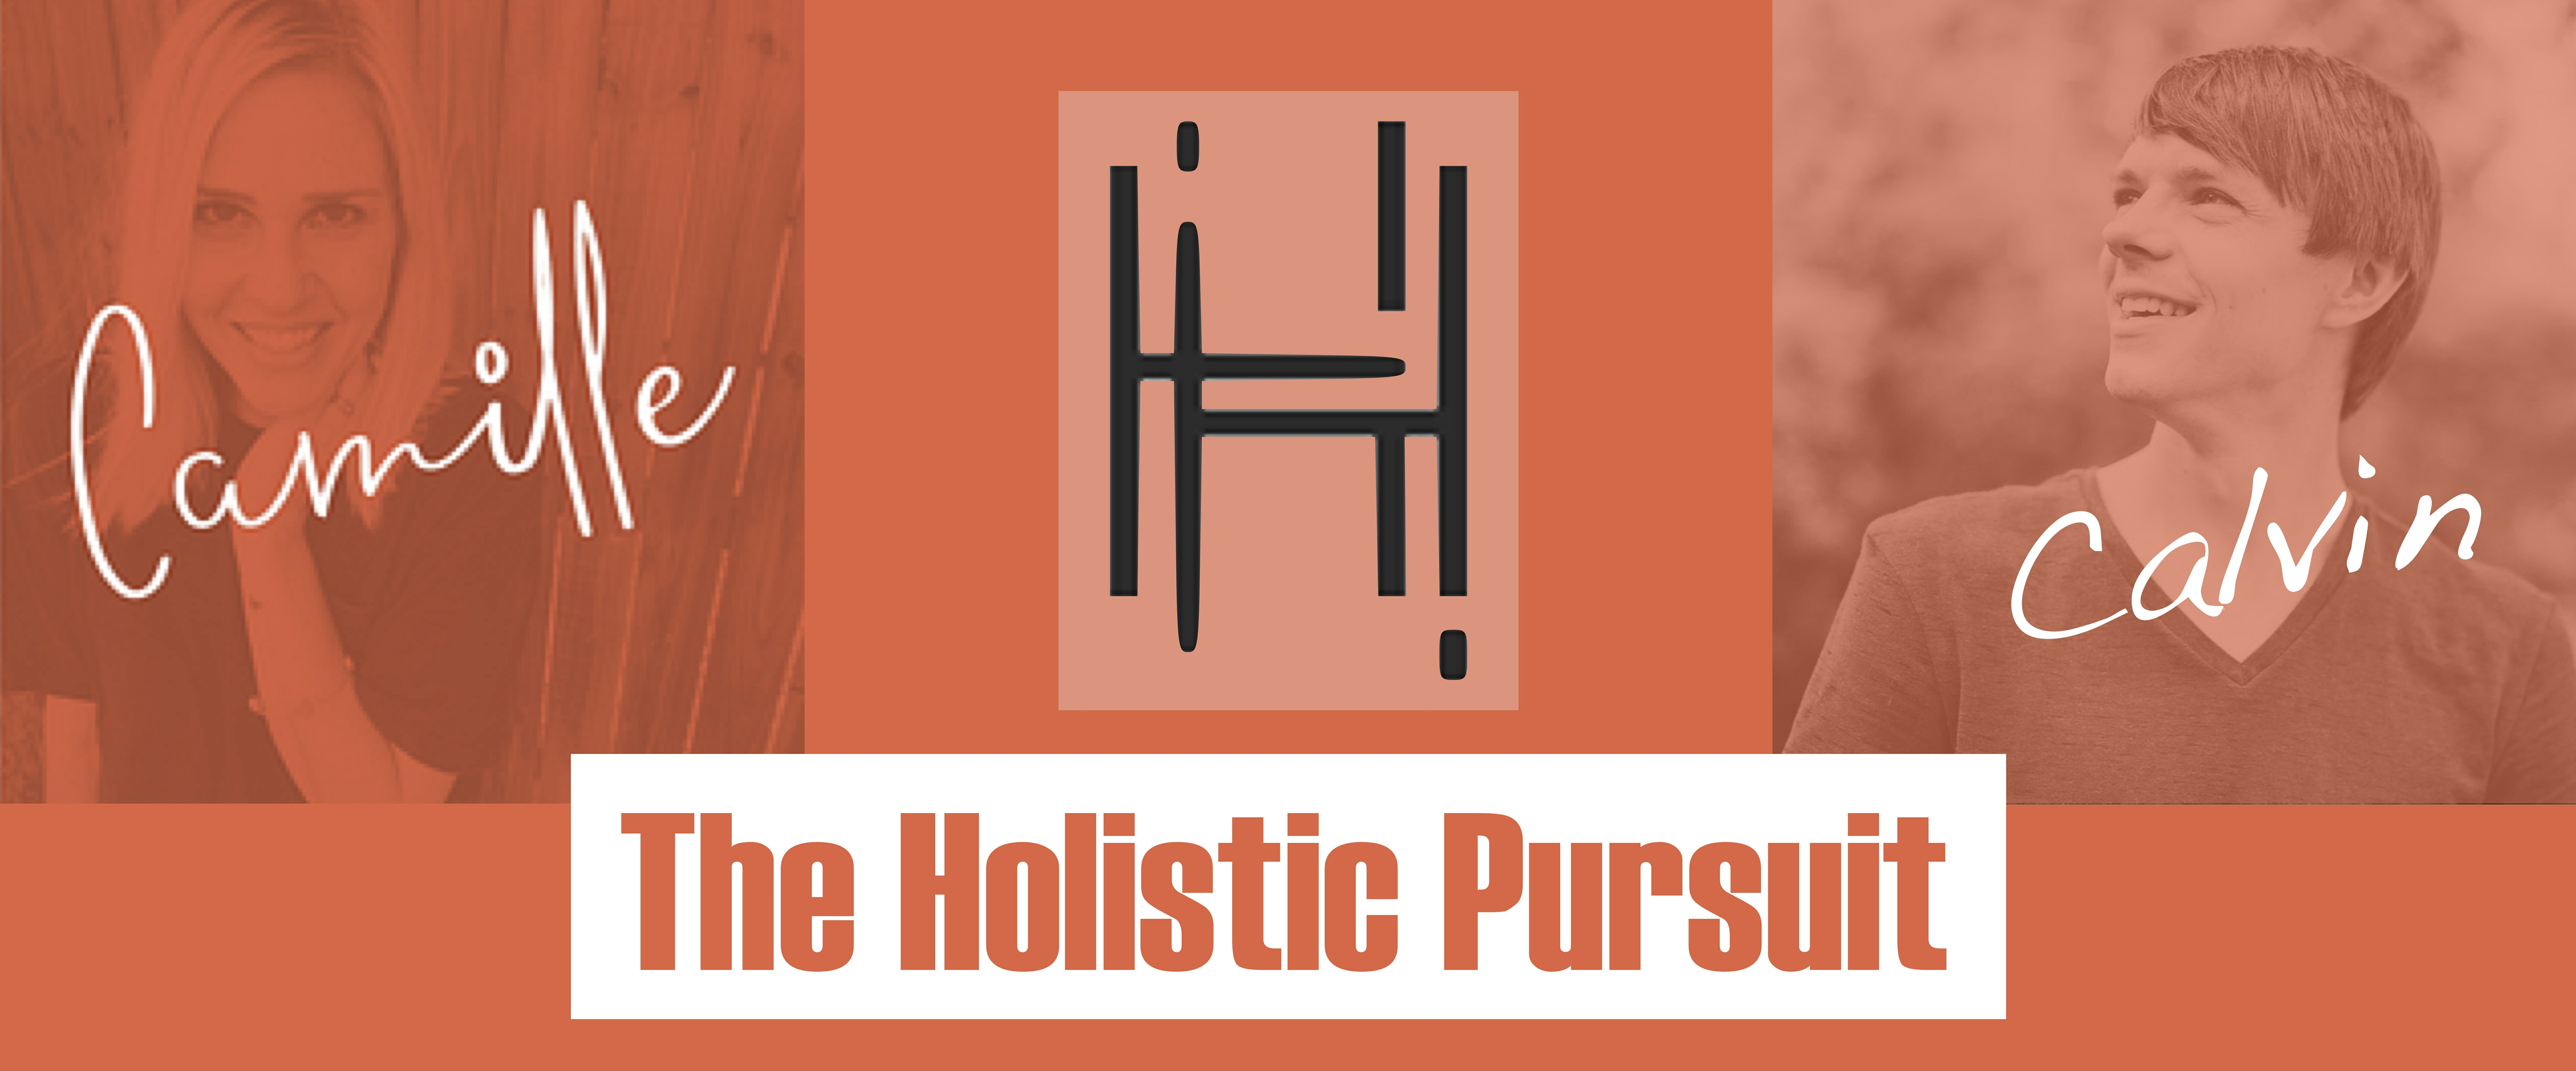 THE HOLISTIC PURSUIT: Dating in America - Interviewing Men, Part 2